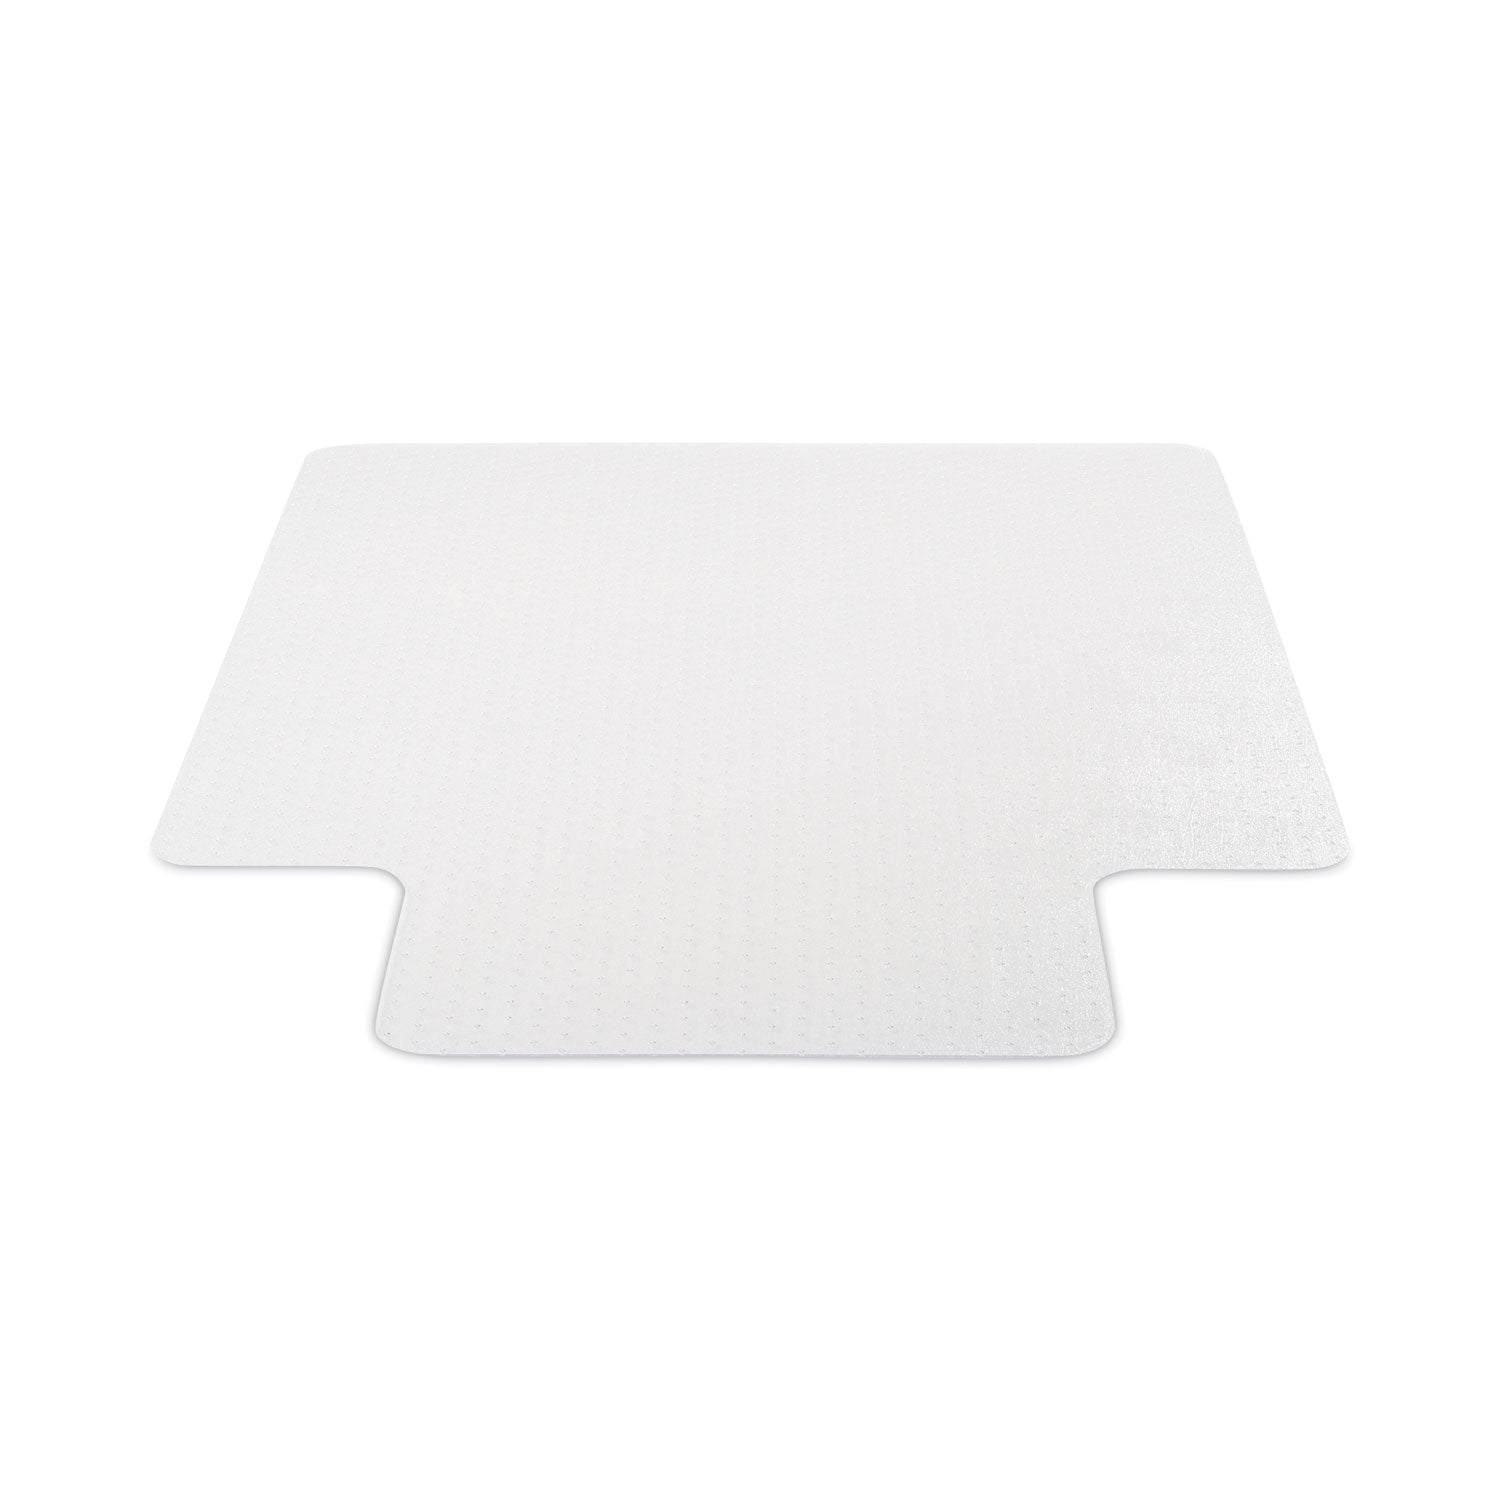 supermat-frequent-use-chair-mat-for-medium-pile-carpet-46-x-60-wide-lipped-clear_defcm14432f - 7